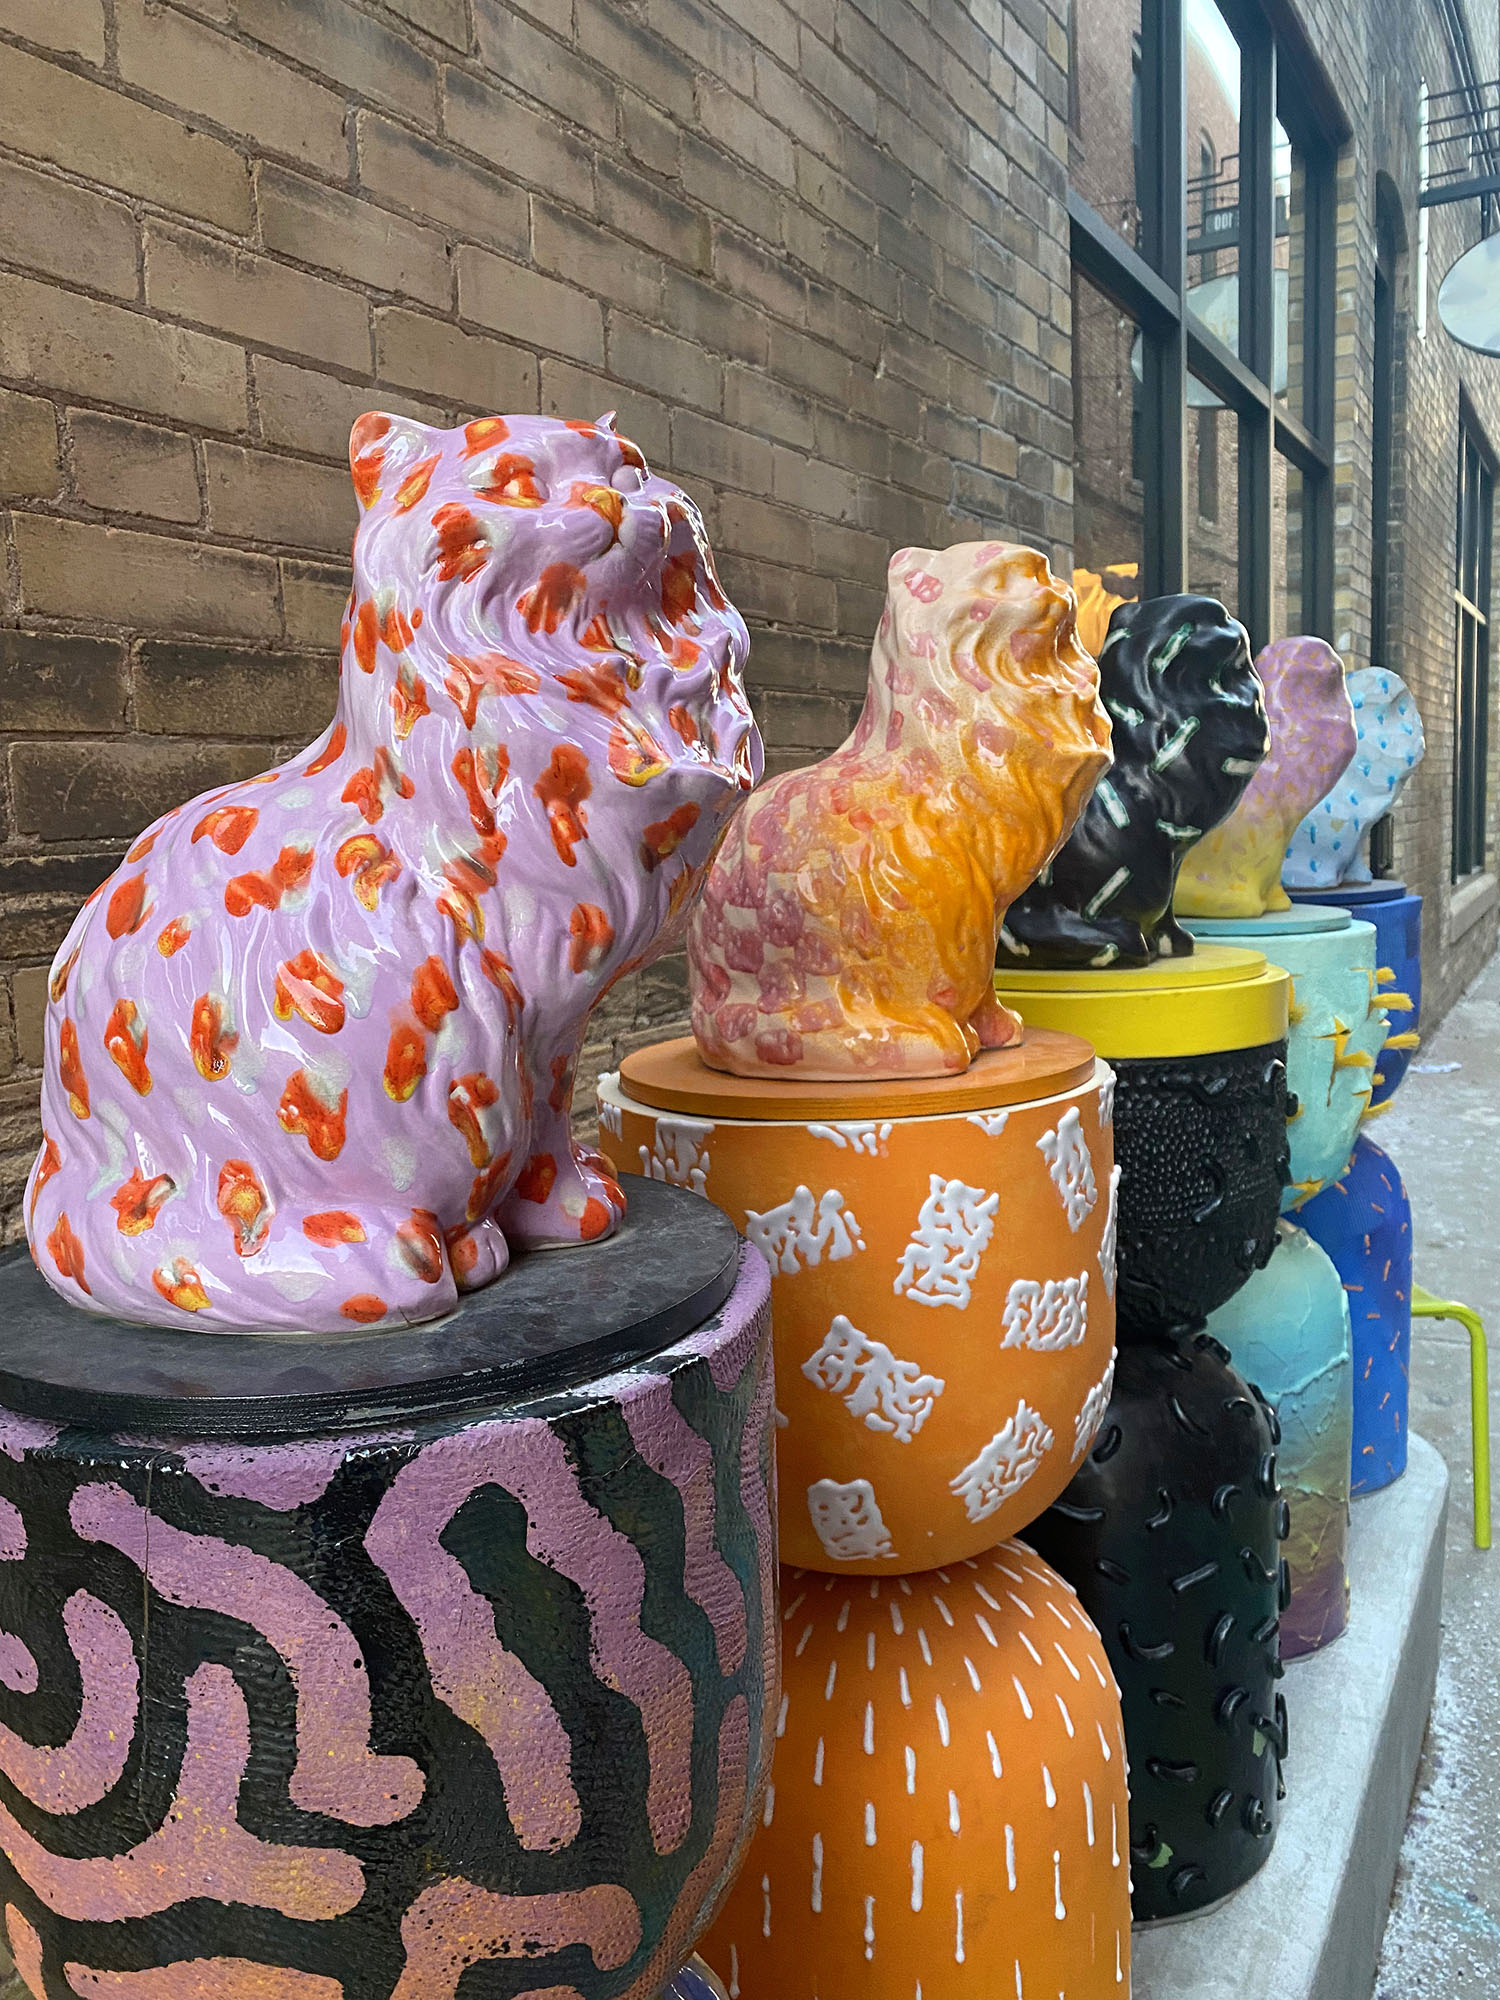 Public art piece featuring statues of colorful melting cats